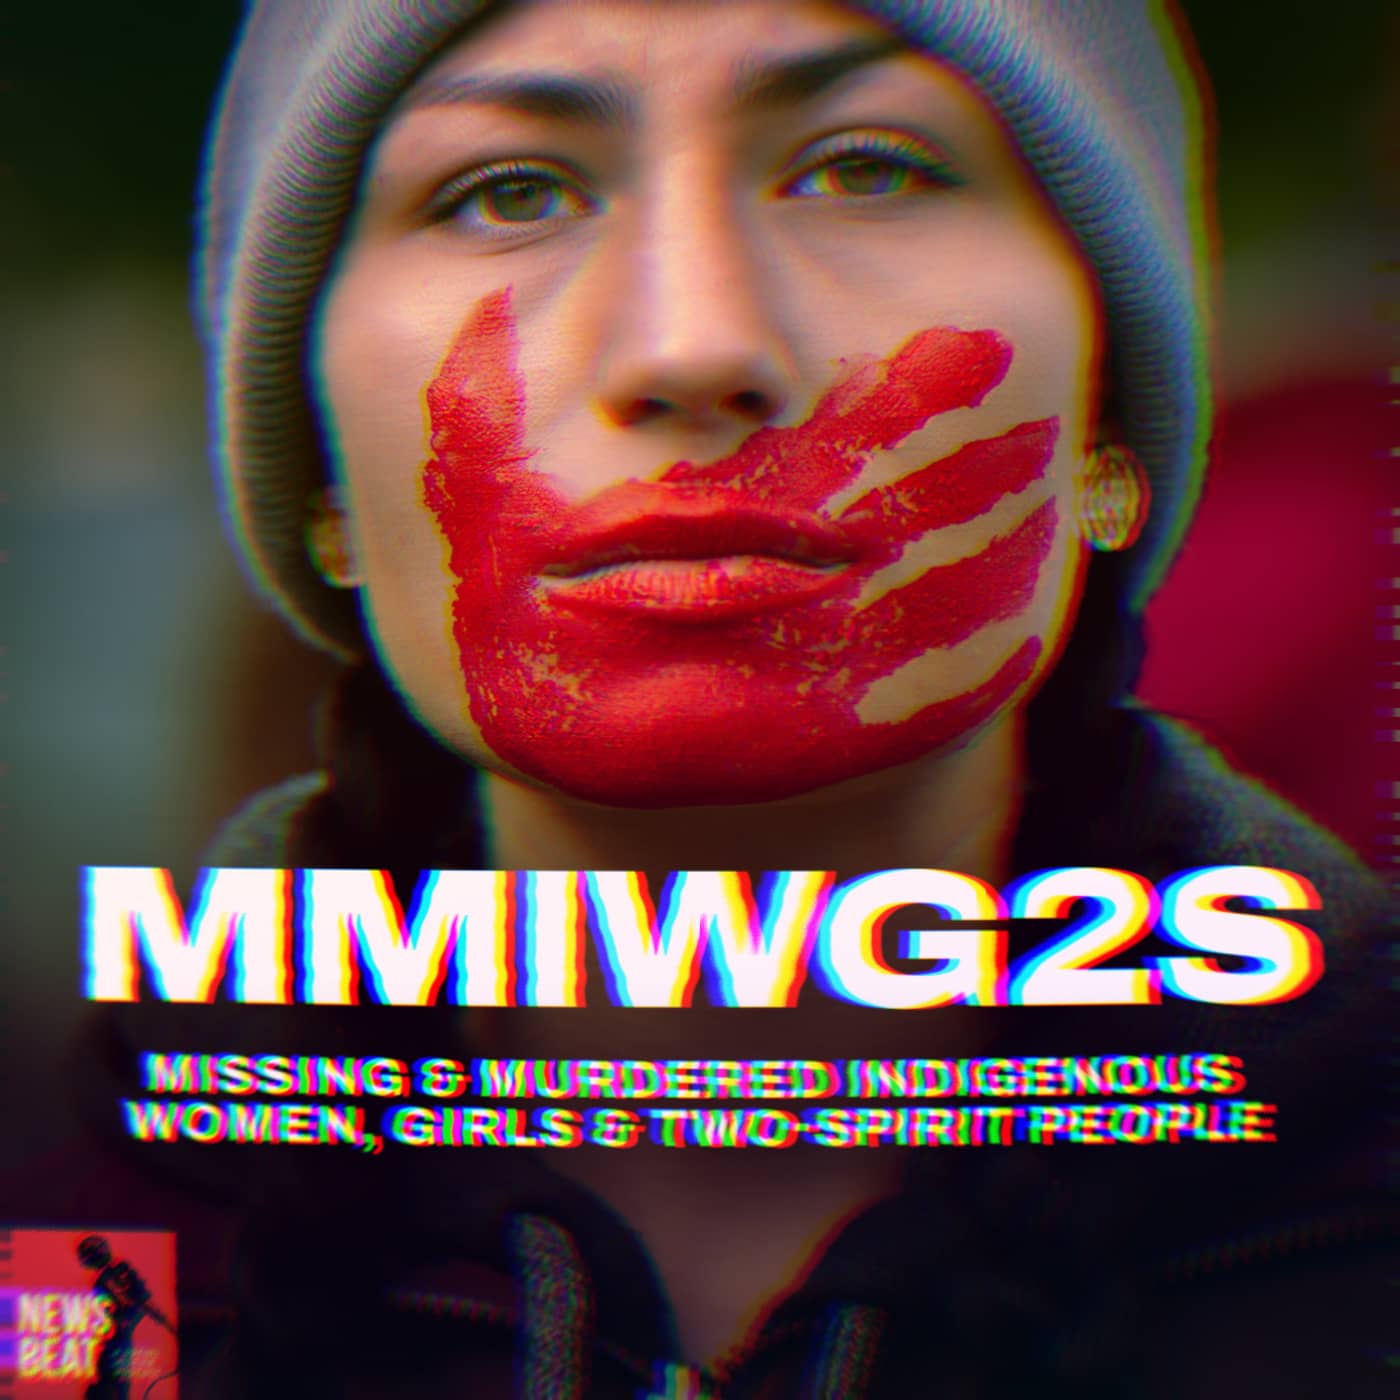 A woman wearing a beanie with a read handprint over her mouth. Accompanying text says MMIWG2S: Missing & Murdered Indigenous Women, Girls & Two-Spirt People. The News Beat Podcast logo is in the bottom left corner.